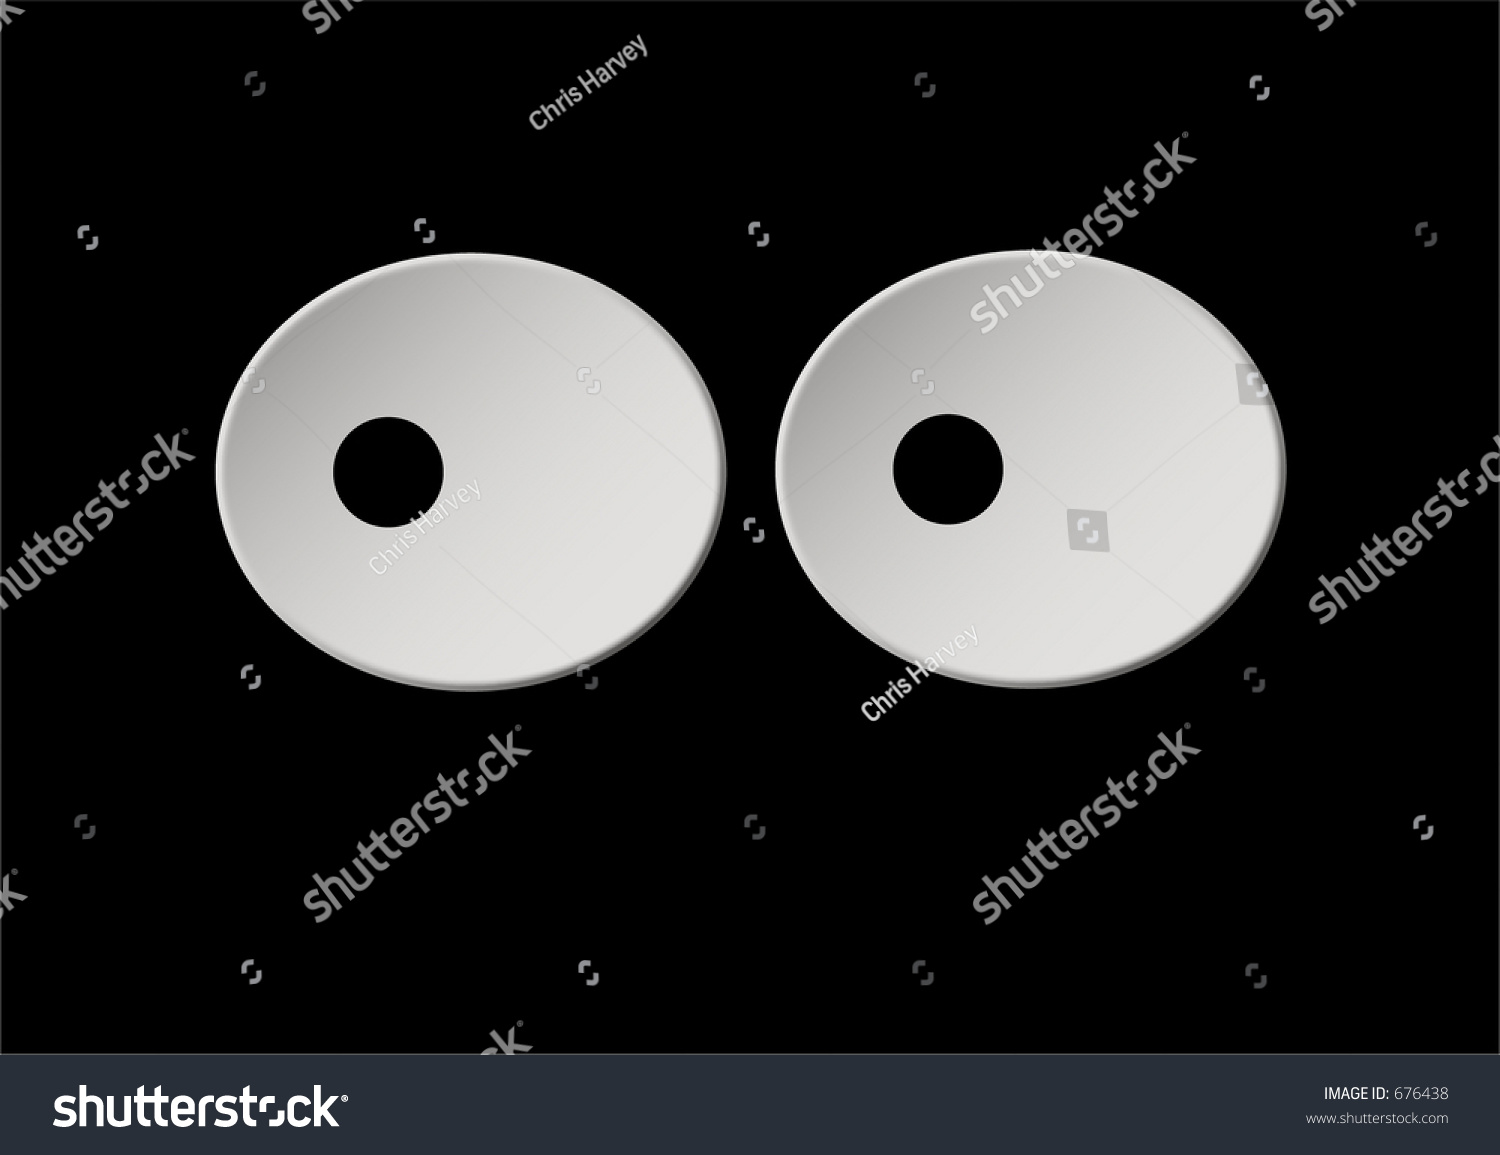 This Is A Set Of Cartoon Eyes. Stock Photo 676438 : Shutterstock